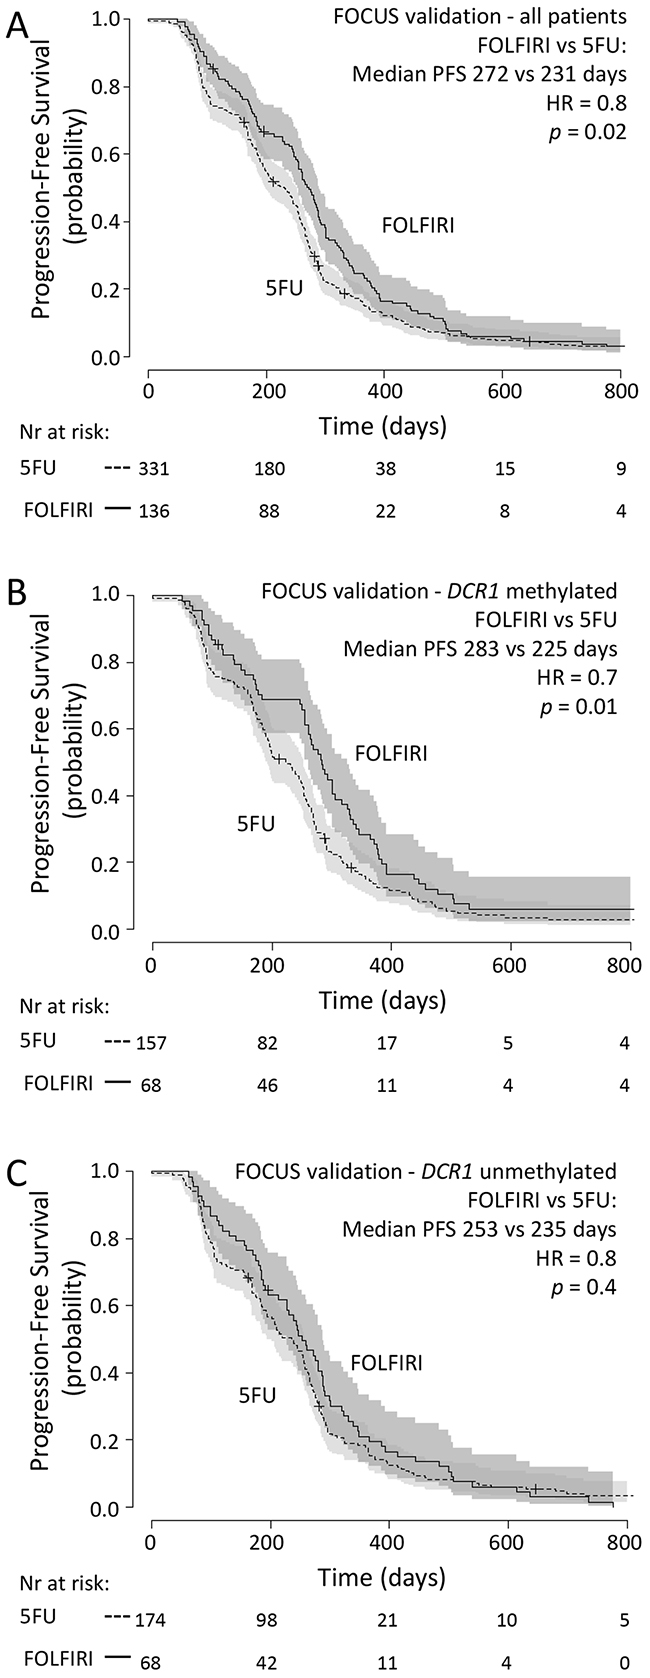 FOCUS validation set: Progression-free survival Progression free survival in metastatic CRC cancer patients treated in first-line with 5-FU (dashed line) or FOLFIRI (solid line)in (A) all patients from the FOCUS validation set, in (B) patientswith methylated tumor DCR1or in (C) patients with unmethylated tumor DCR1.